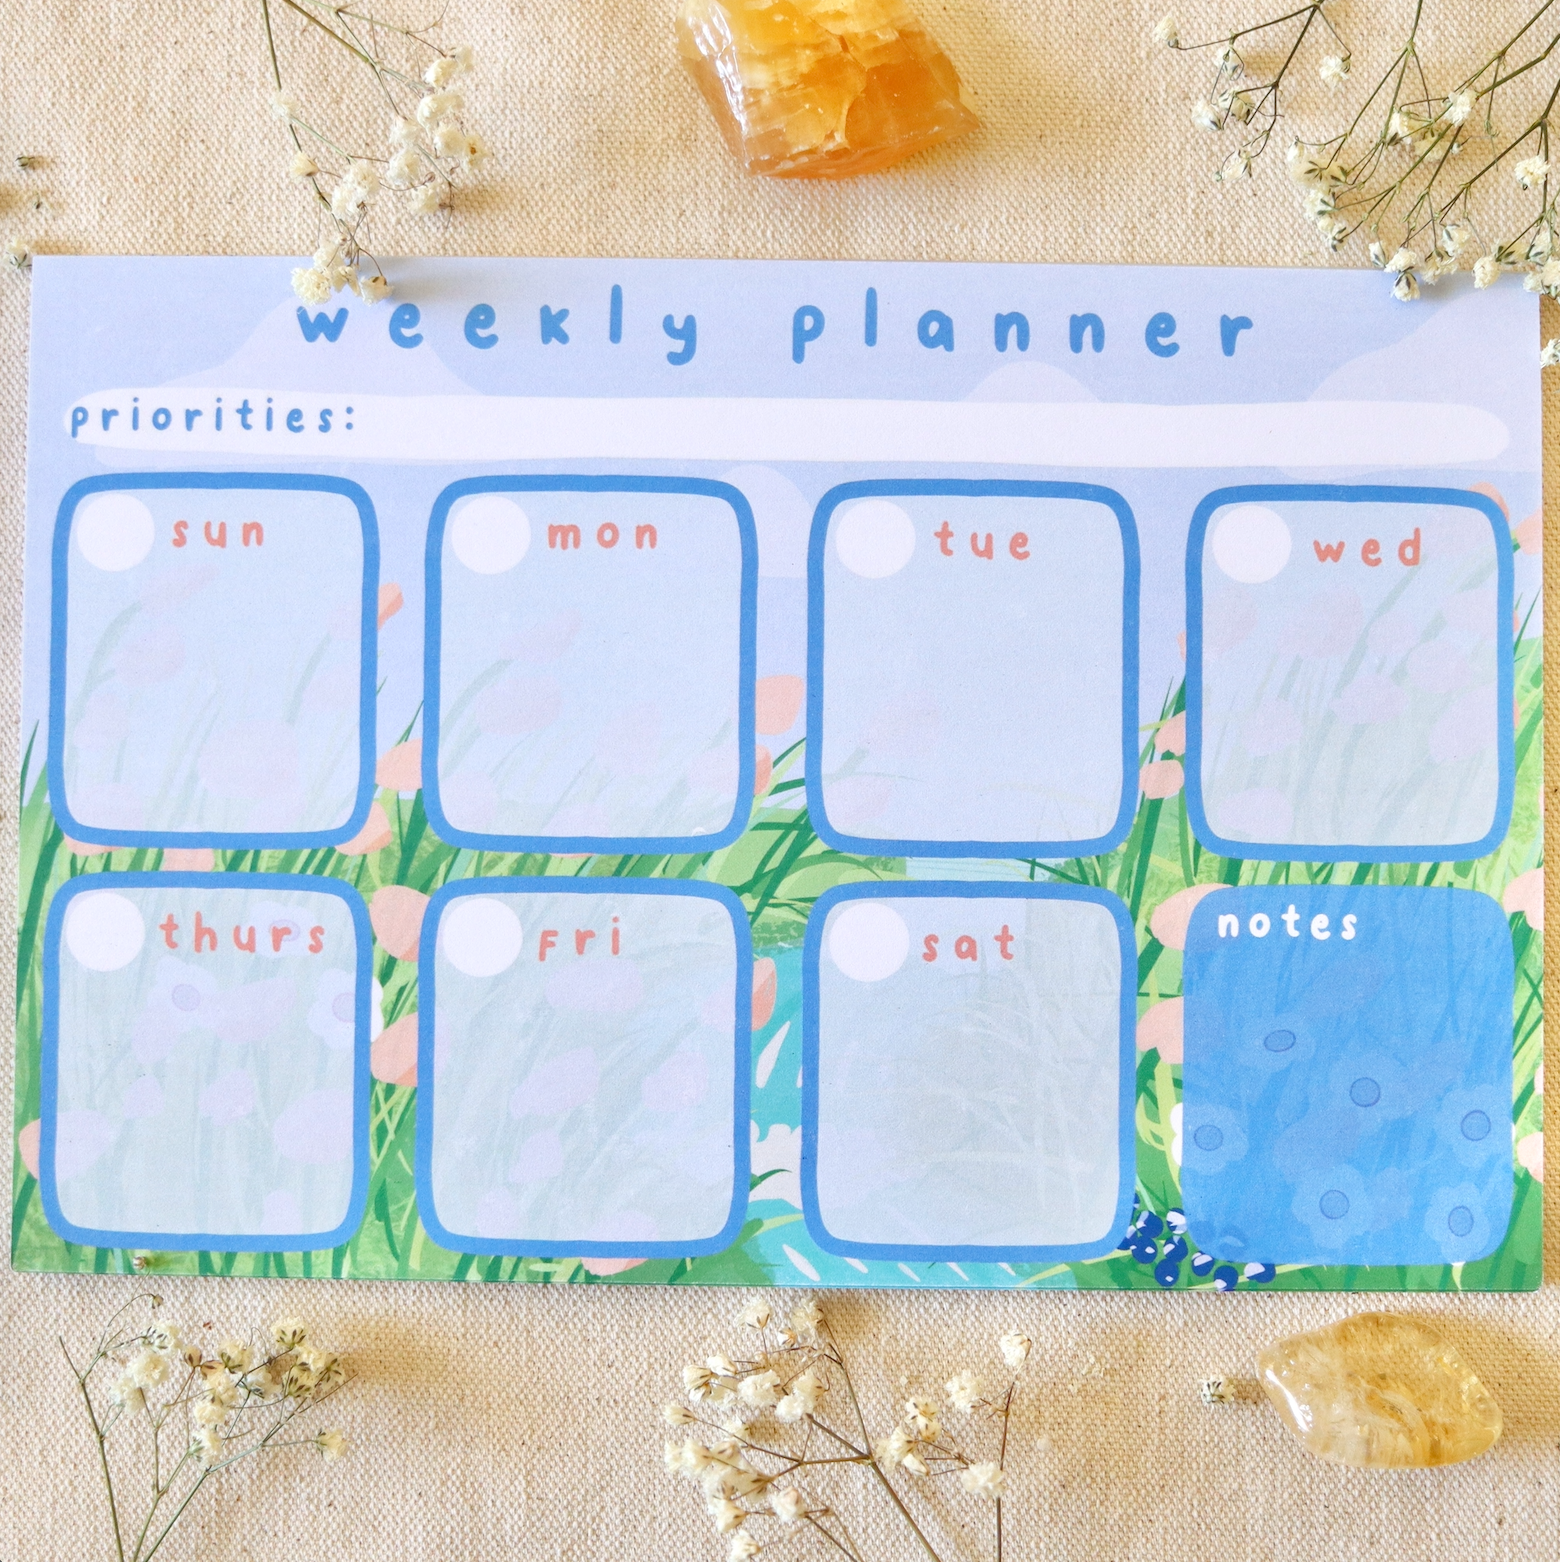 Howl's Dated Weekly Planner